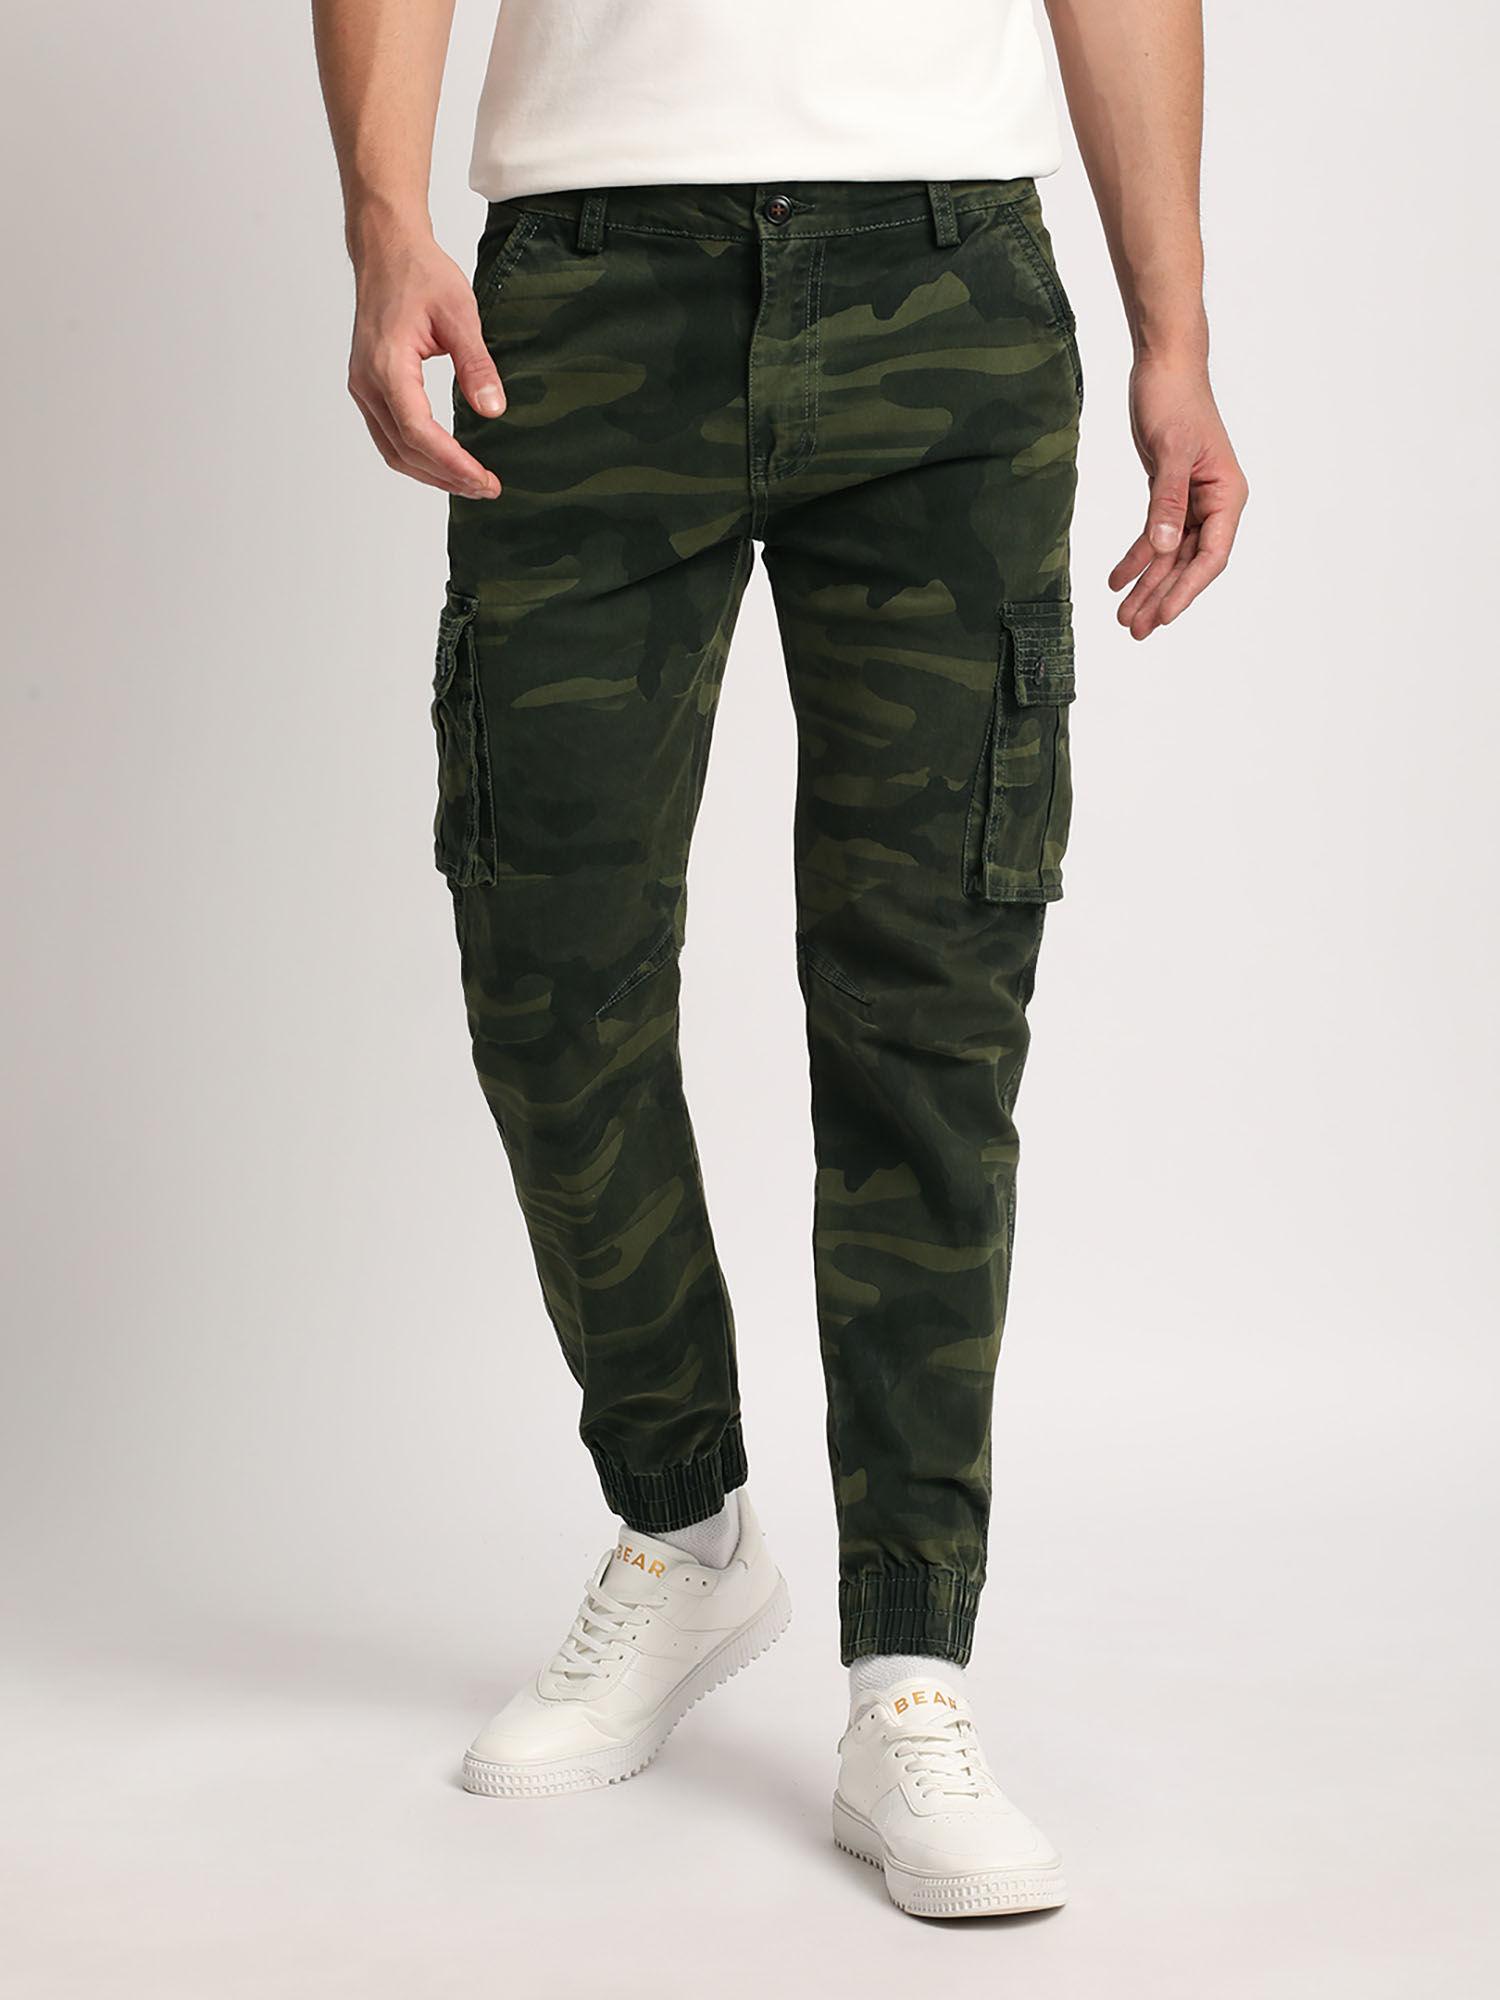 olive-mid-rise-camouflage-cargo-trouser-for-men